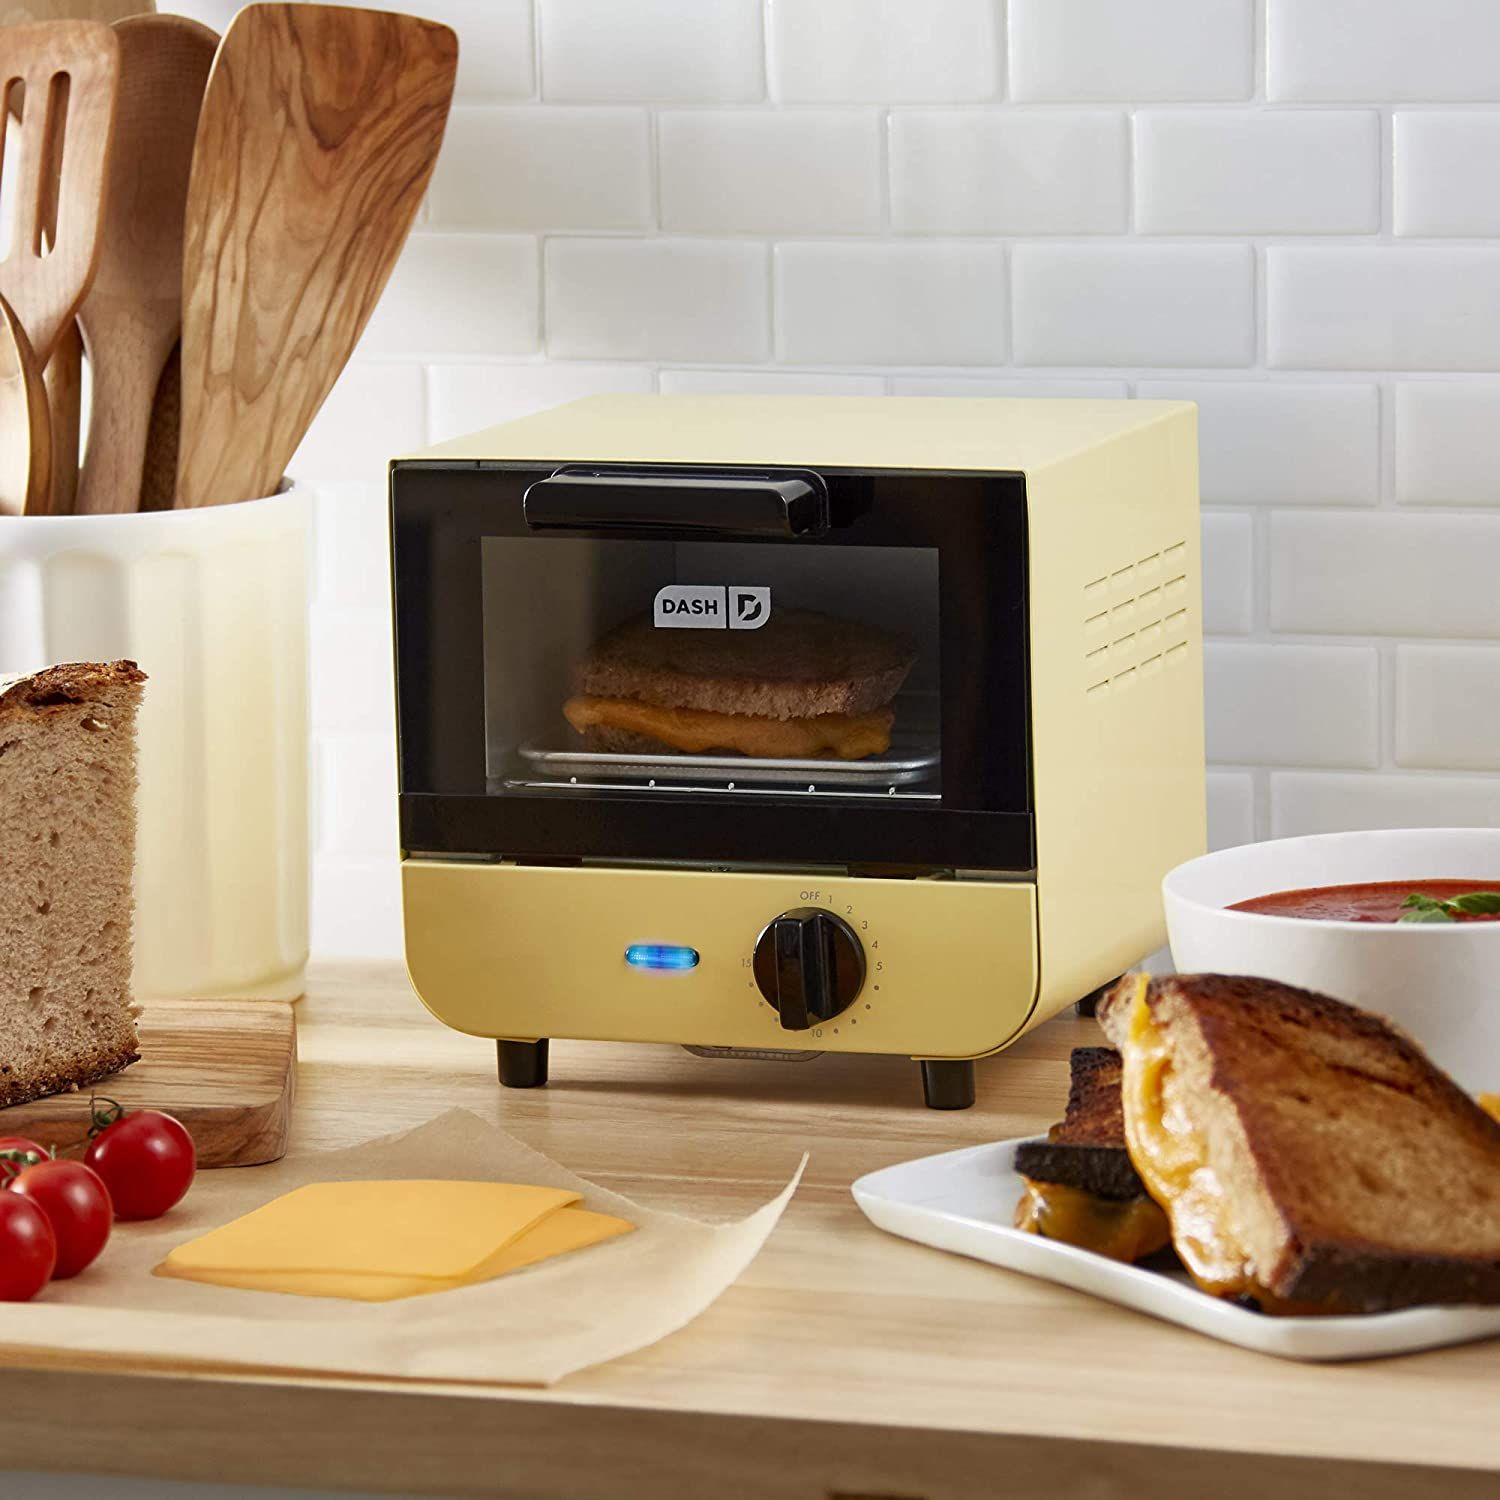 This $20 Dash Mini Toaster Oven will work well for people with limited, Kitchen Finds